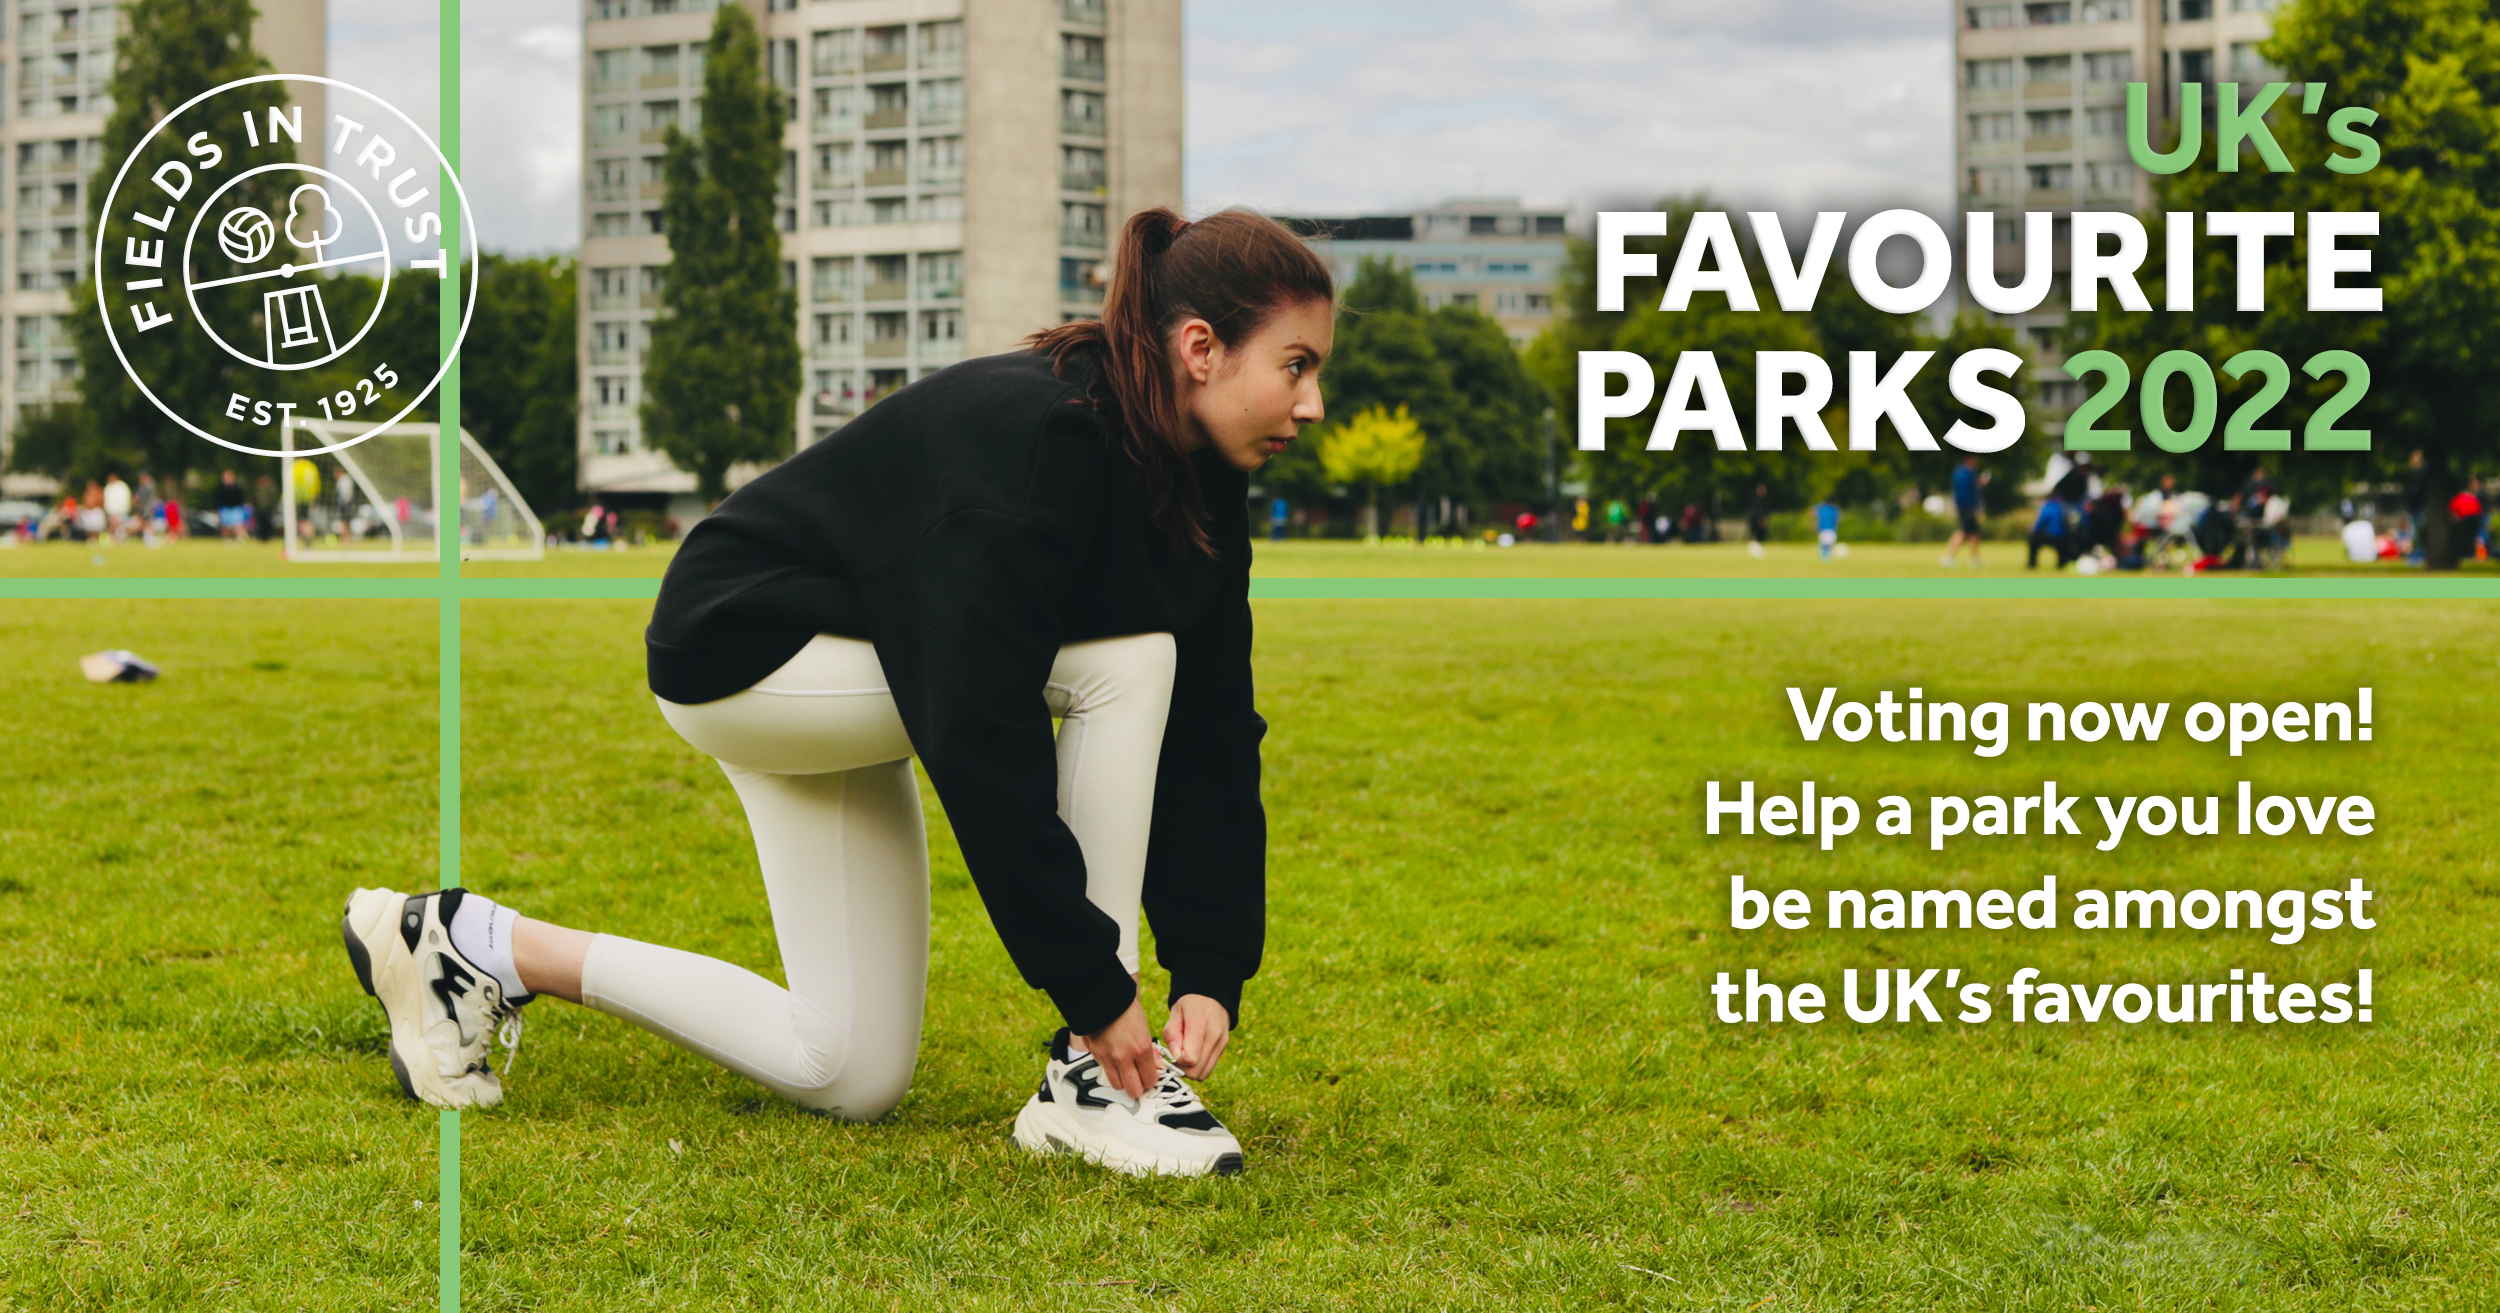 Image of lady tying her shoelace on a green field, with text encouraging people to vote for their favourite park.